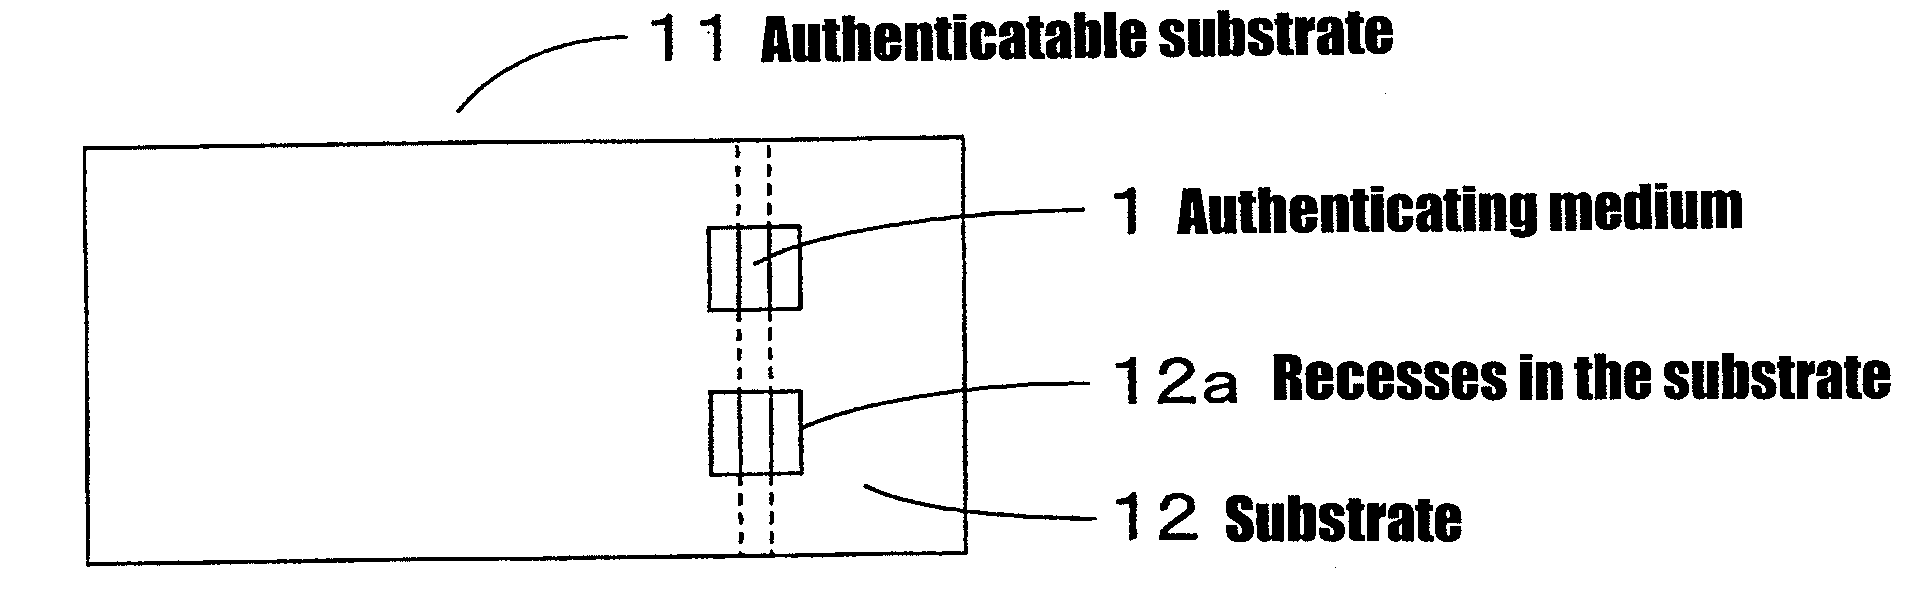 Authenticating medium and authenticatable substrate